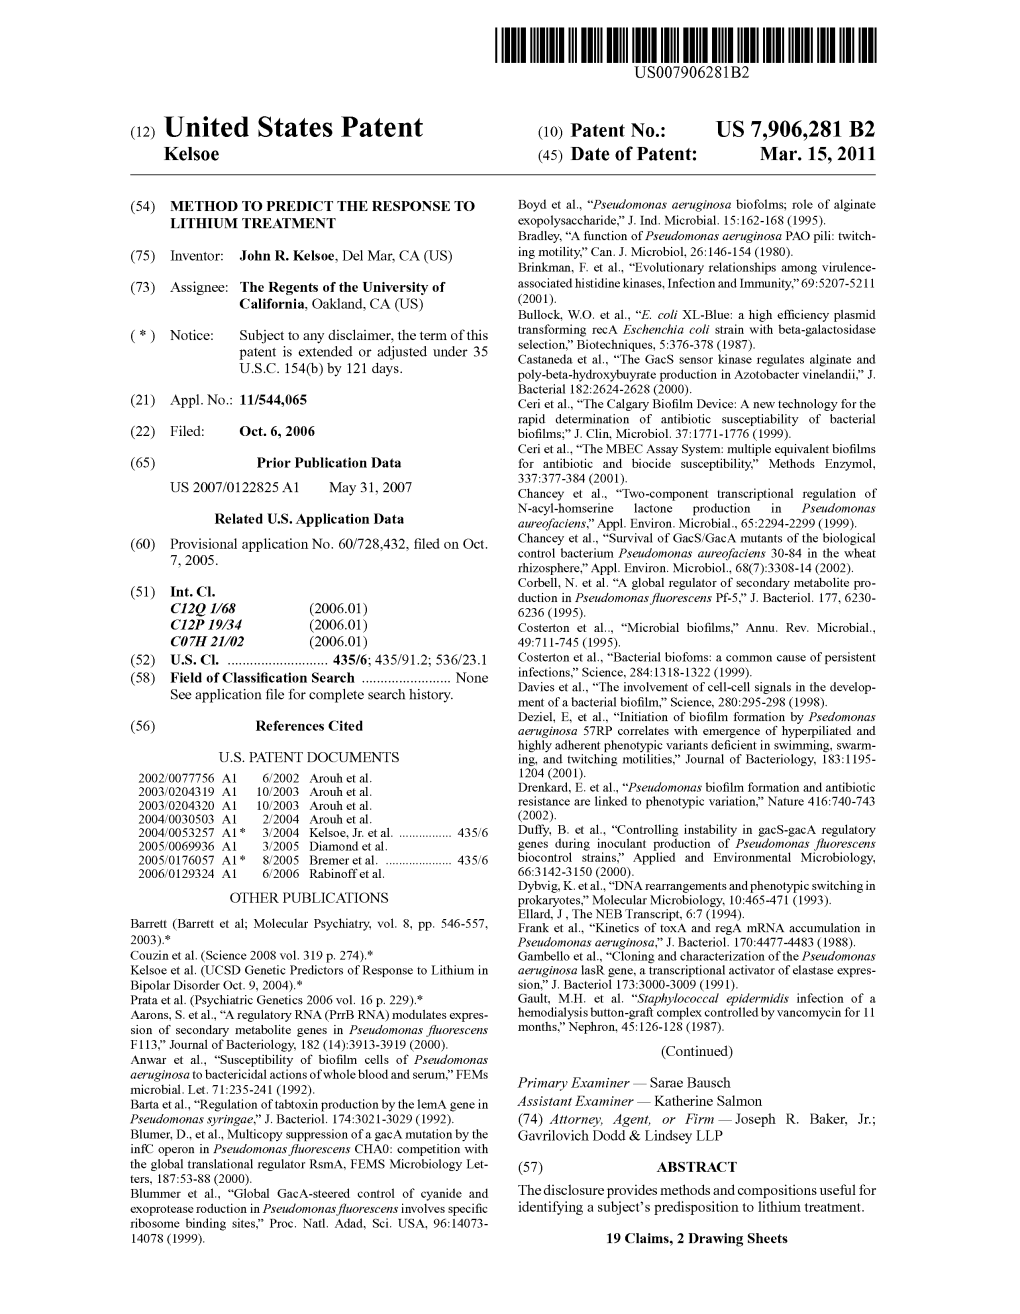 (12) United States Patent (10) Patent No.: US 7,906,281 B2 Kelsoe (45) Date of Patent: Mar